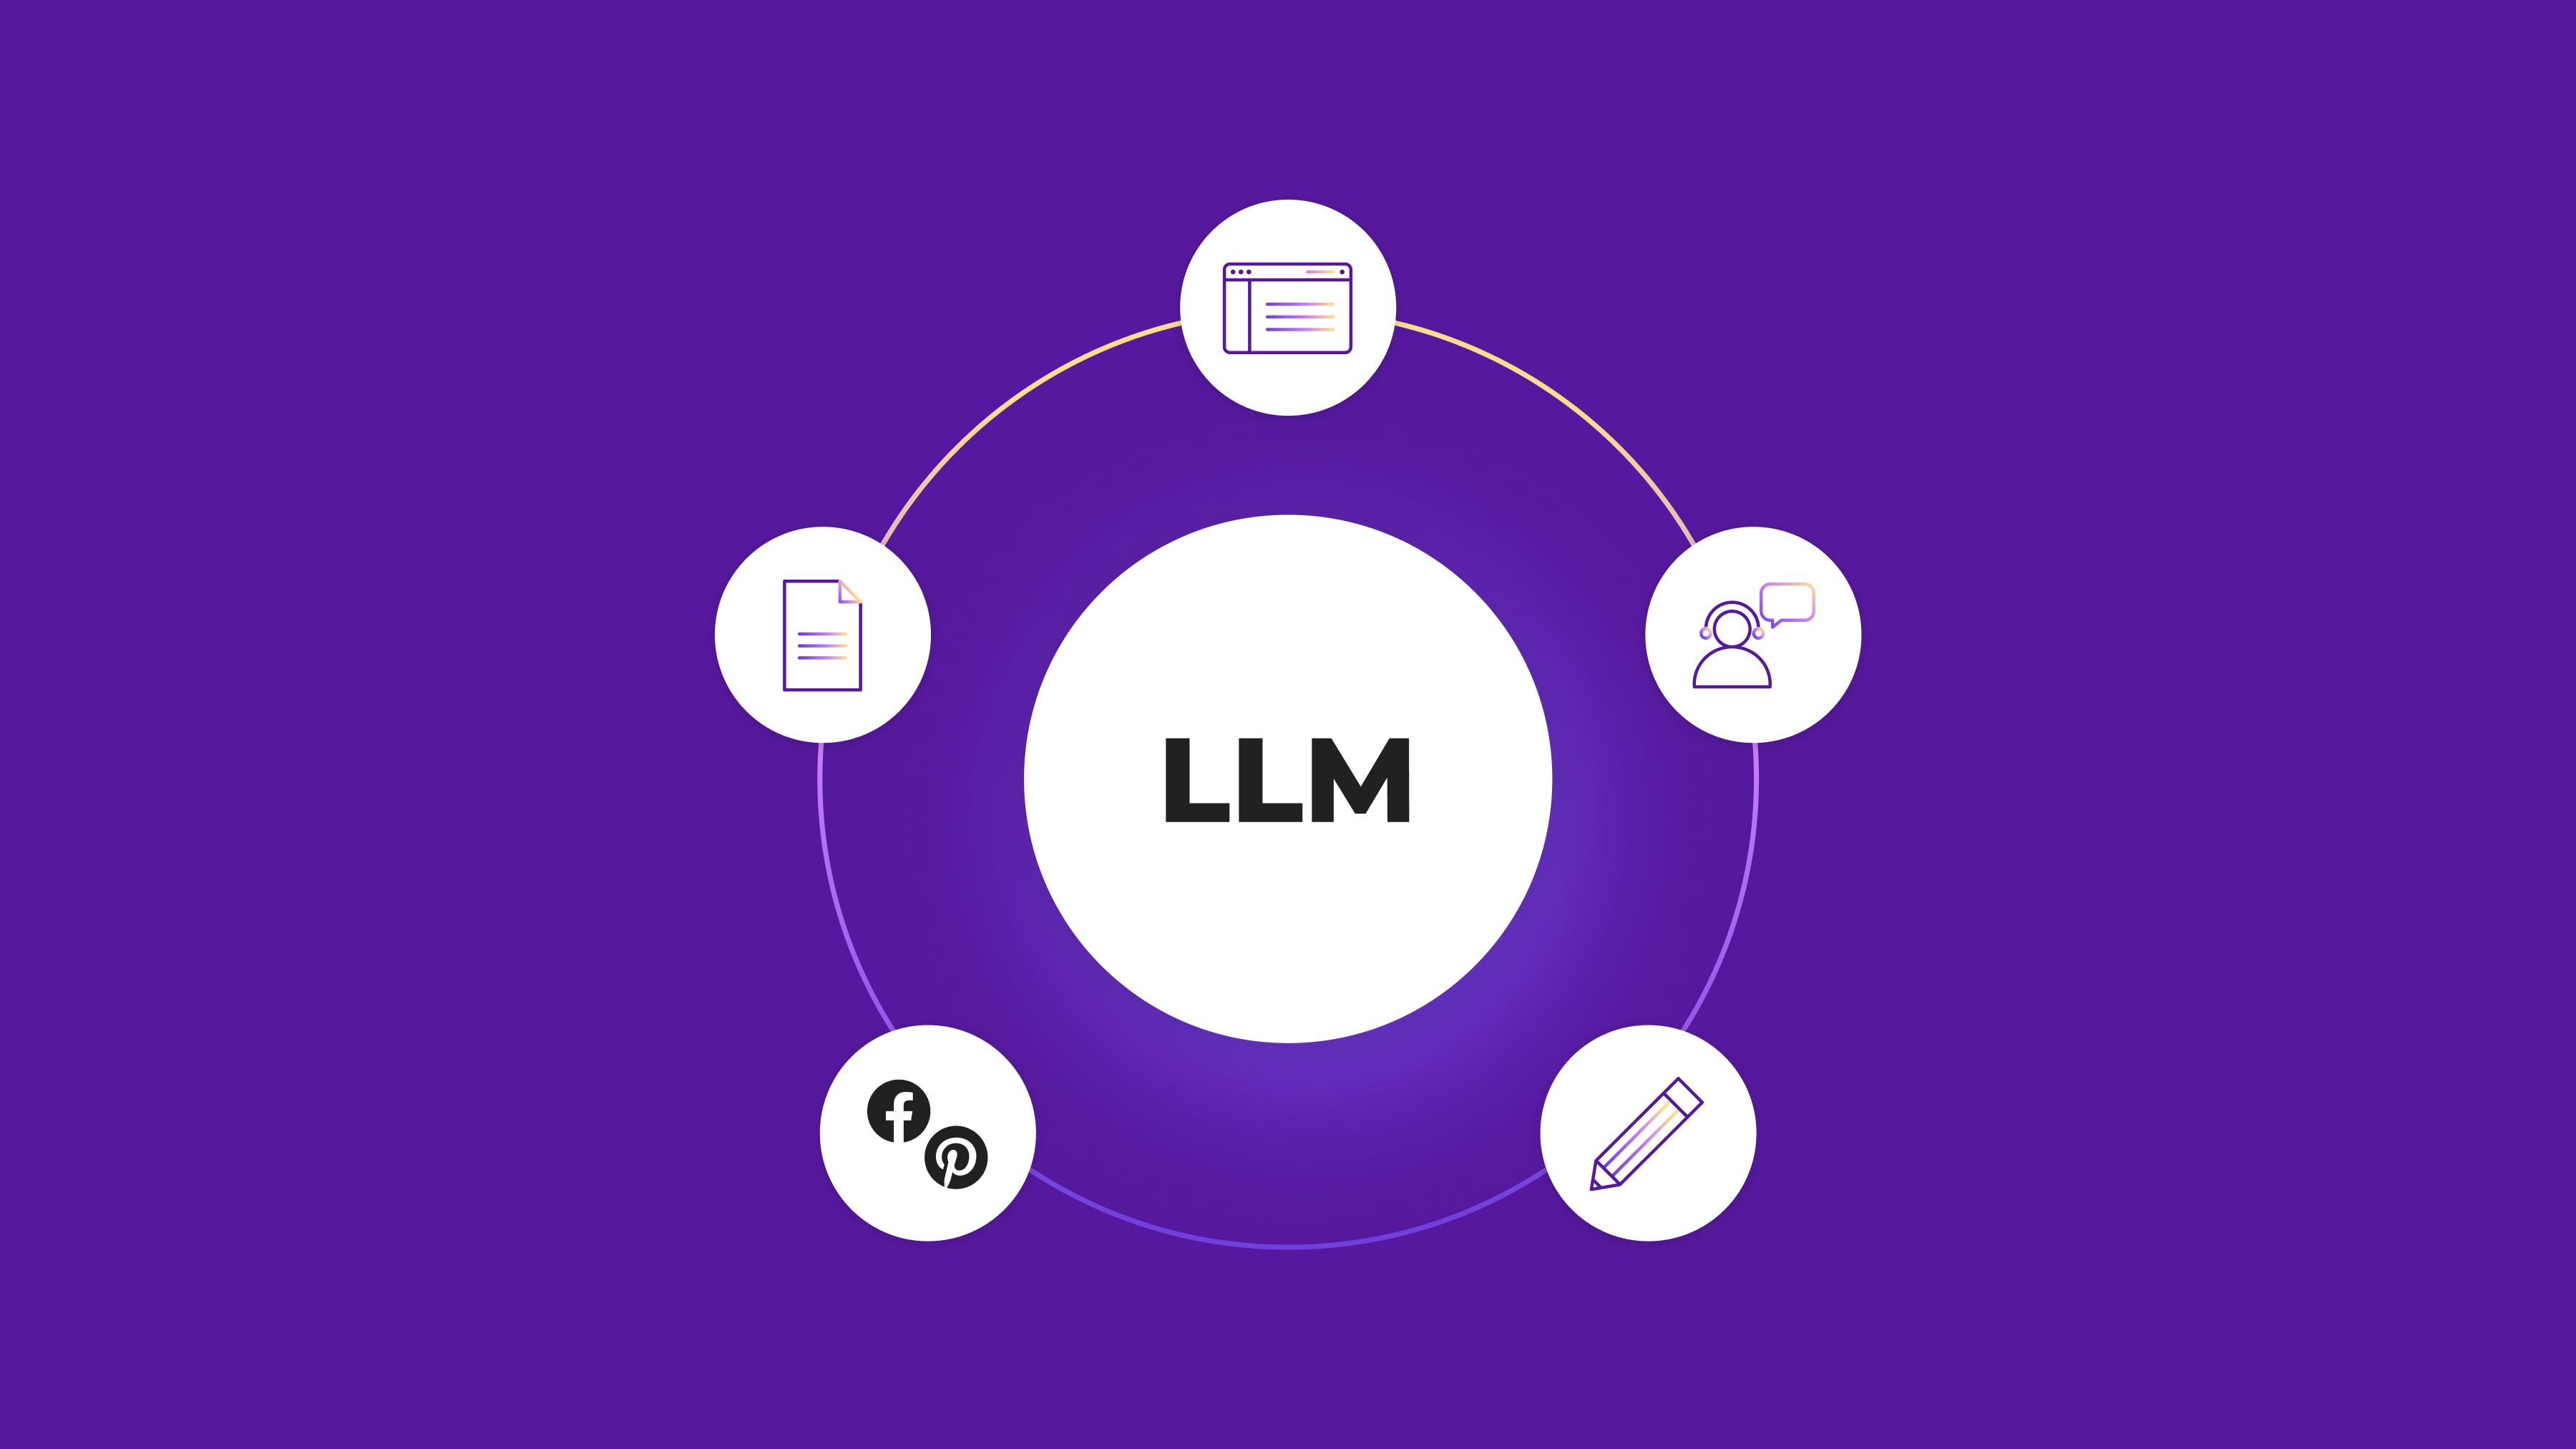 Learn how LLM translation tools can benefit your business, increase revenue, and help you enter new markets. Check out use cases and how you can start today.